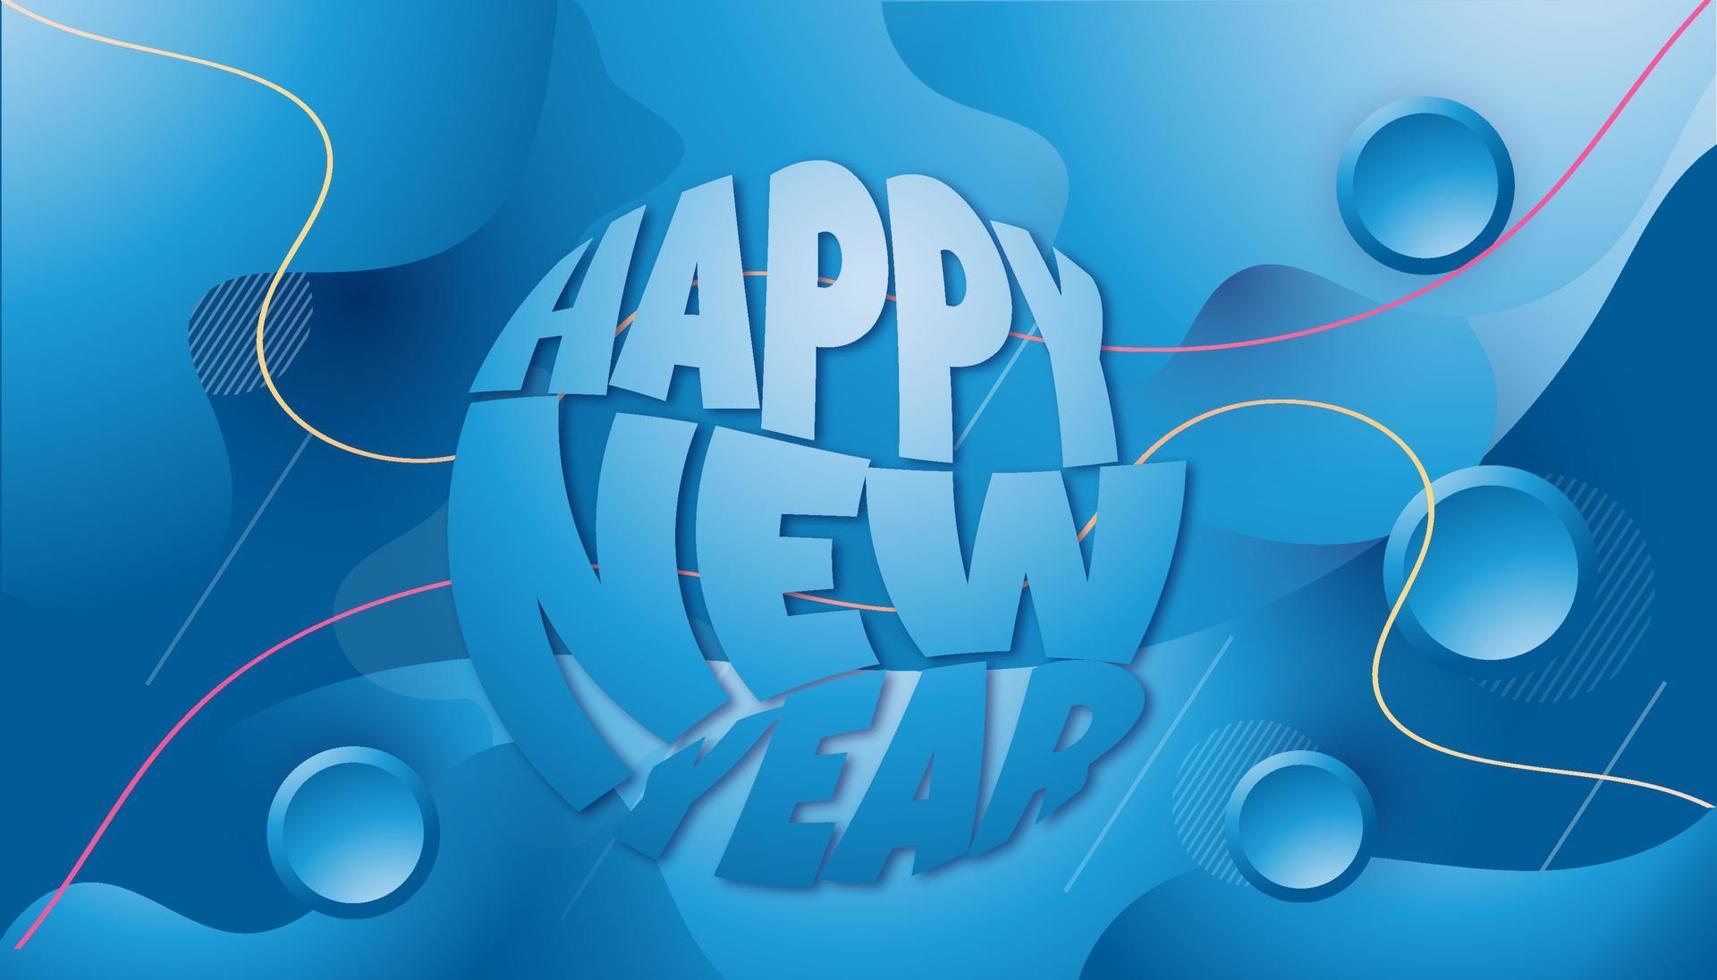 Happy New Year lettering on blue gradient vector background.